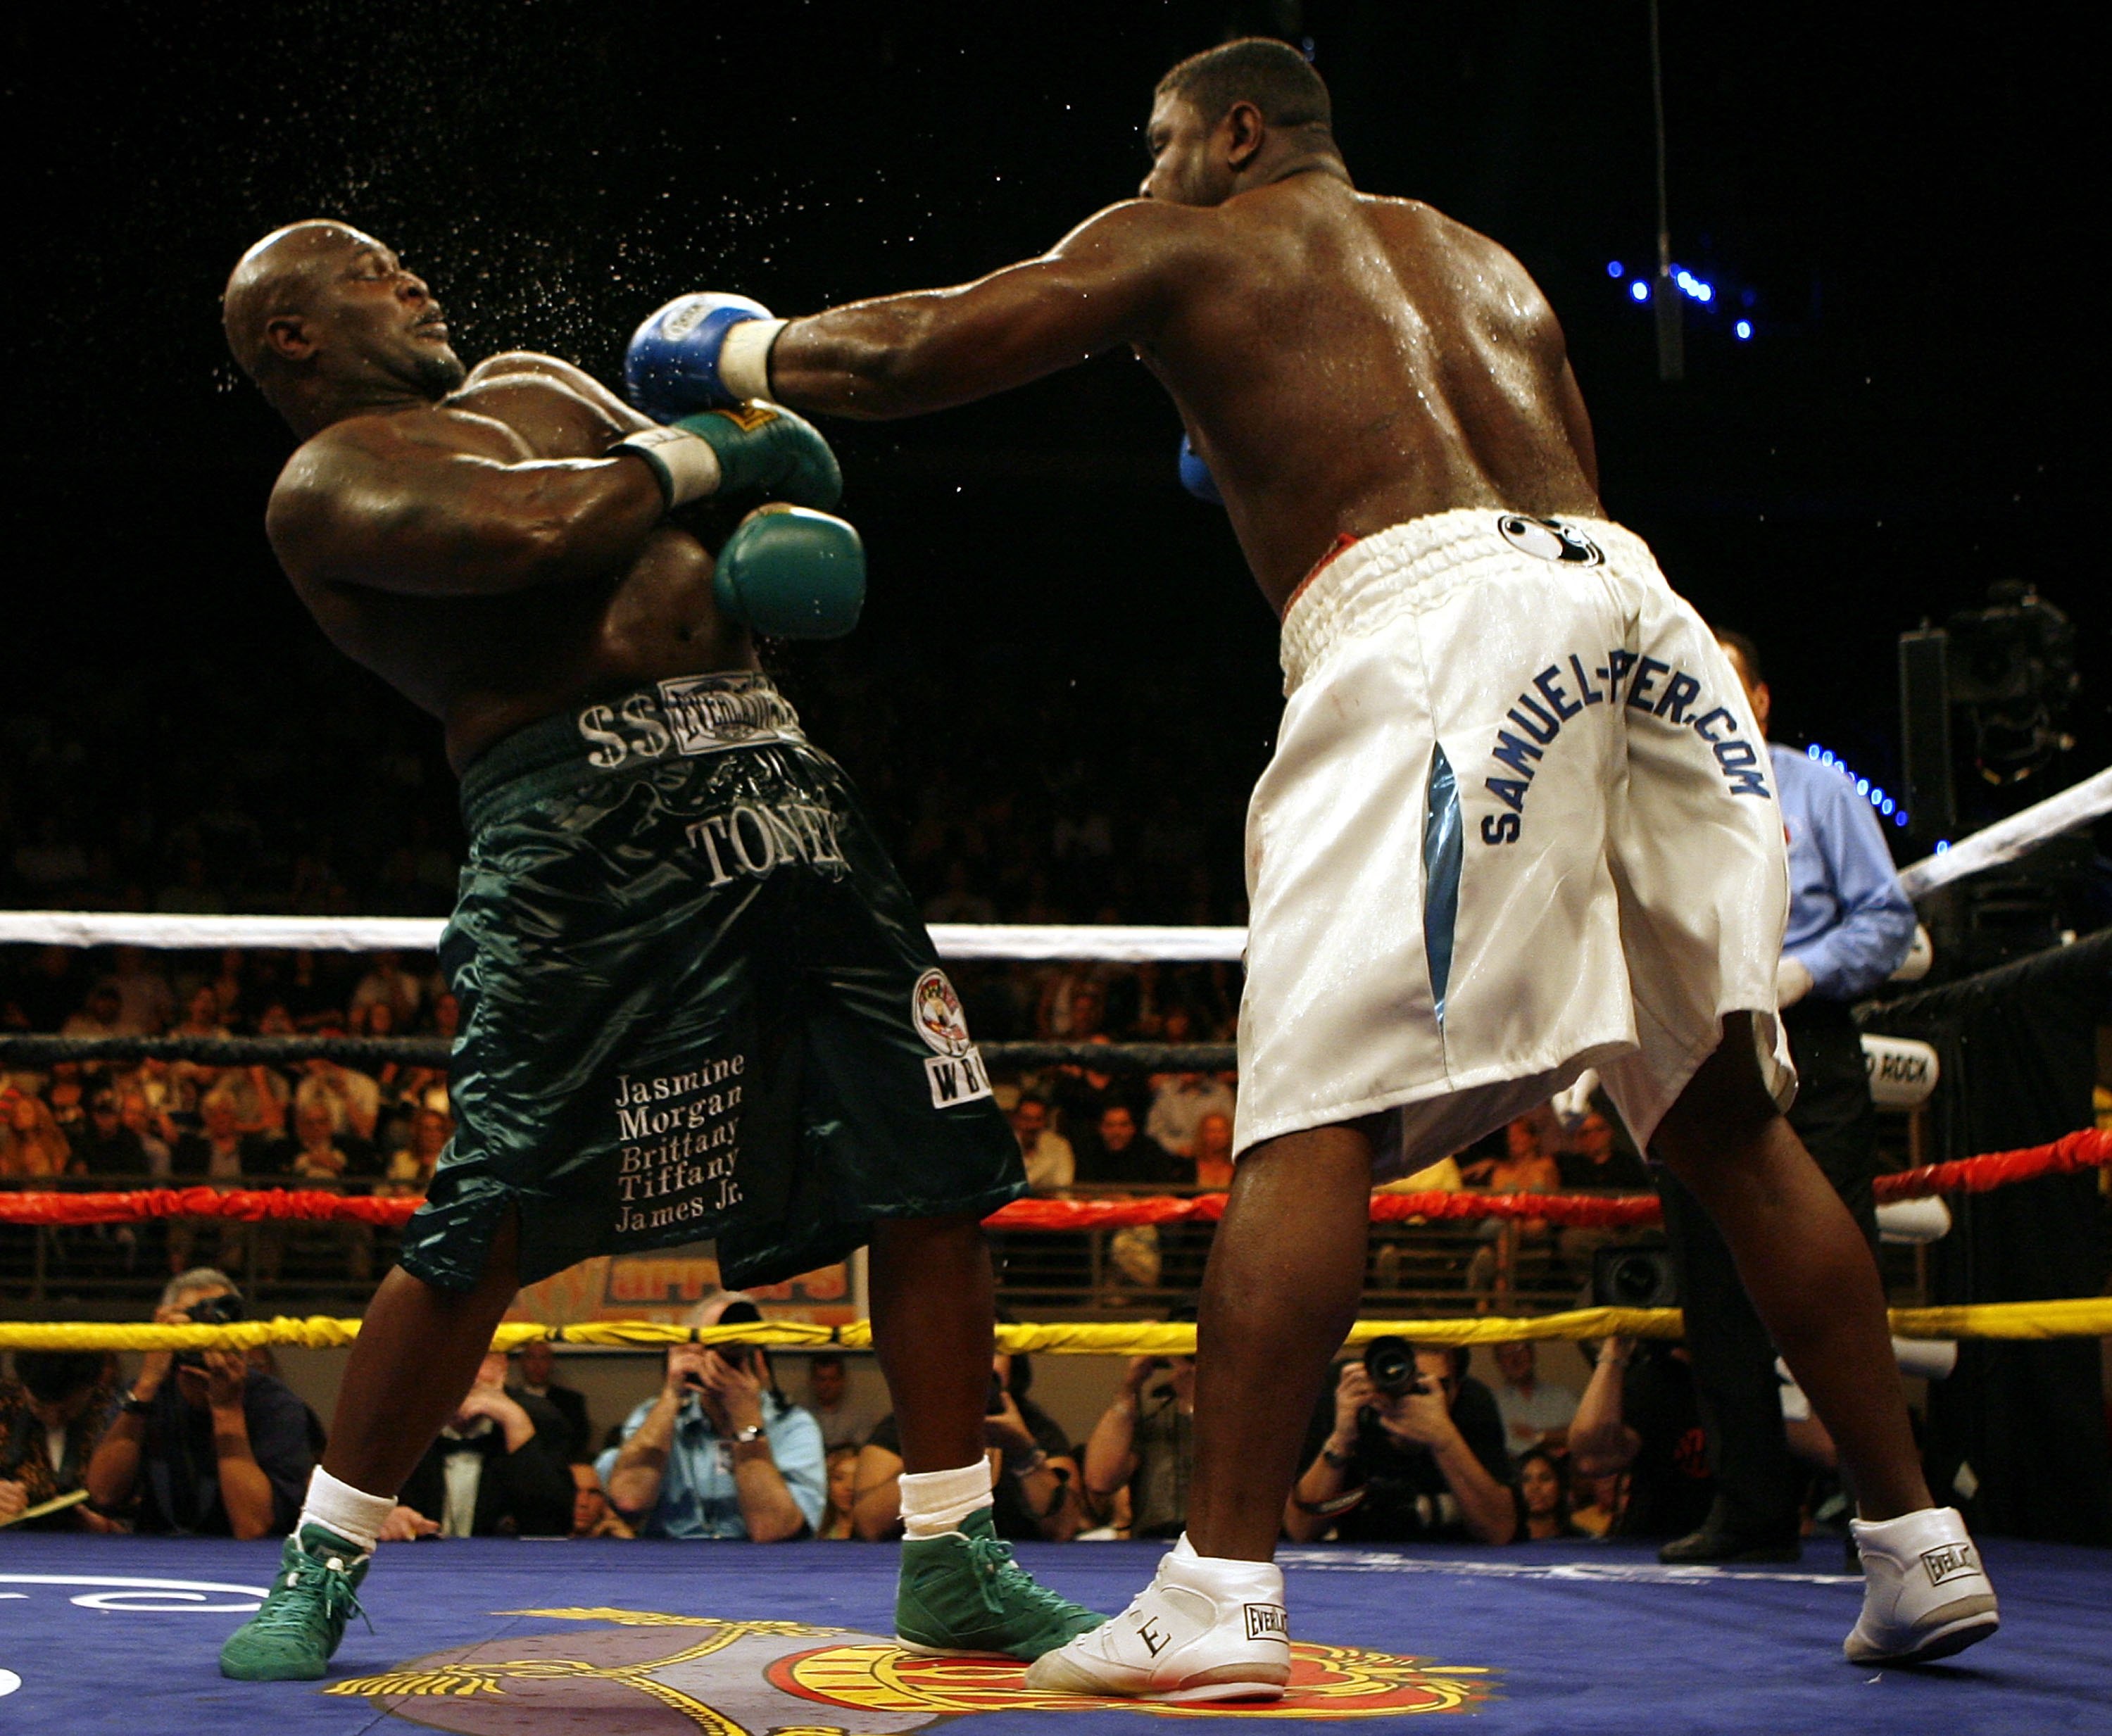 HOLLYWOOD, FL - JANUARY 06:  Samuel 'Nigerian Nightmare' Peter (R) exchanges punches during his victory by decission against James ' Lights Out' Toney in a WBC heavyweight title eliminator fight at the Hard Rock Hotel and Casino January 6, 2007 in Hollywo